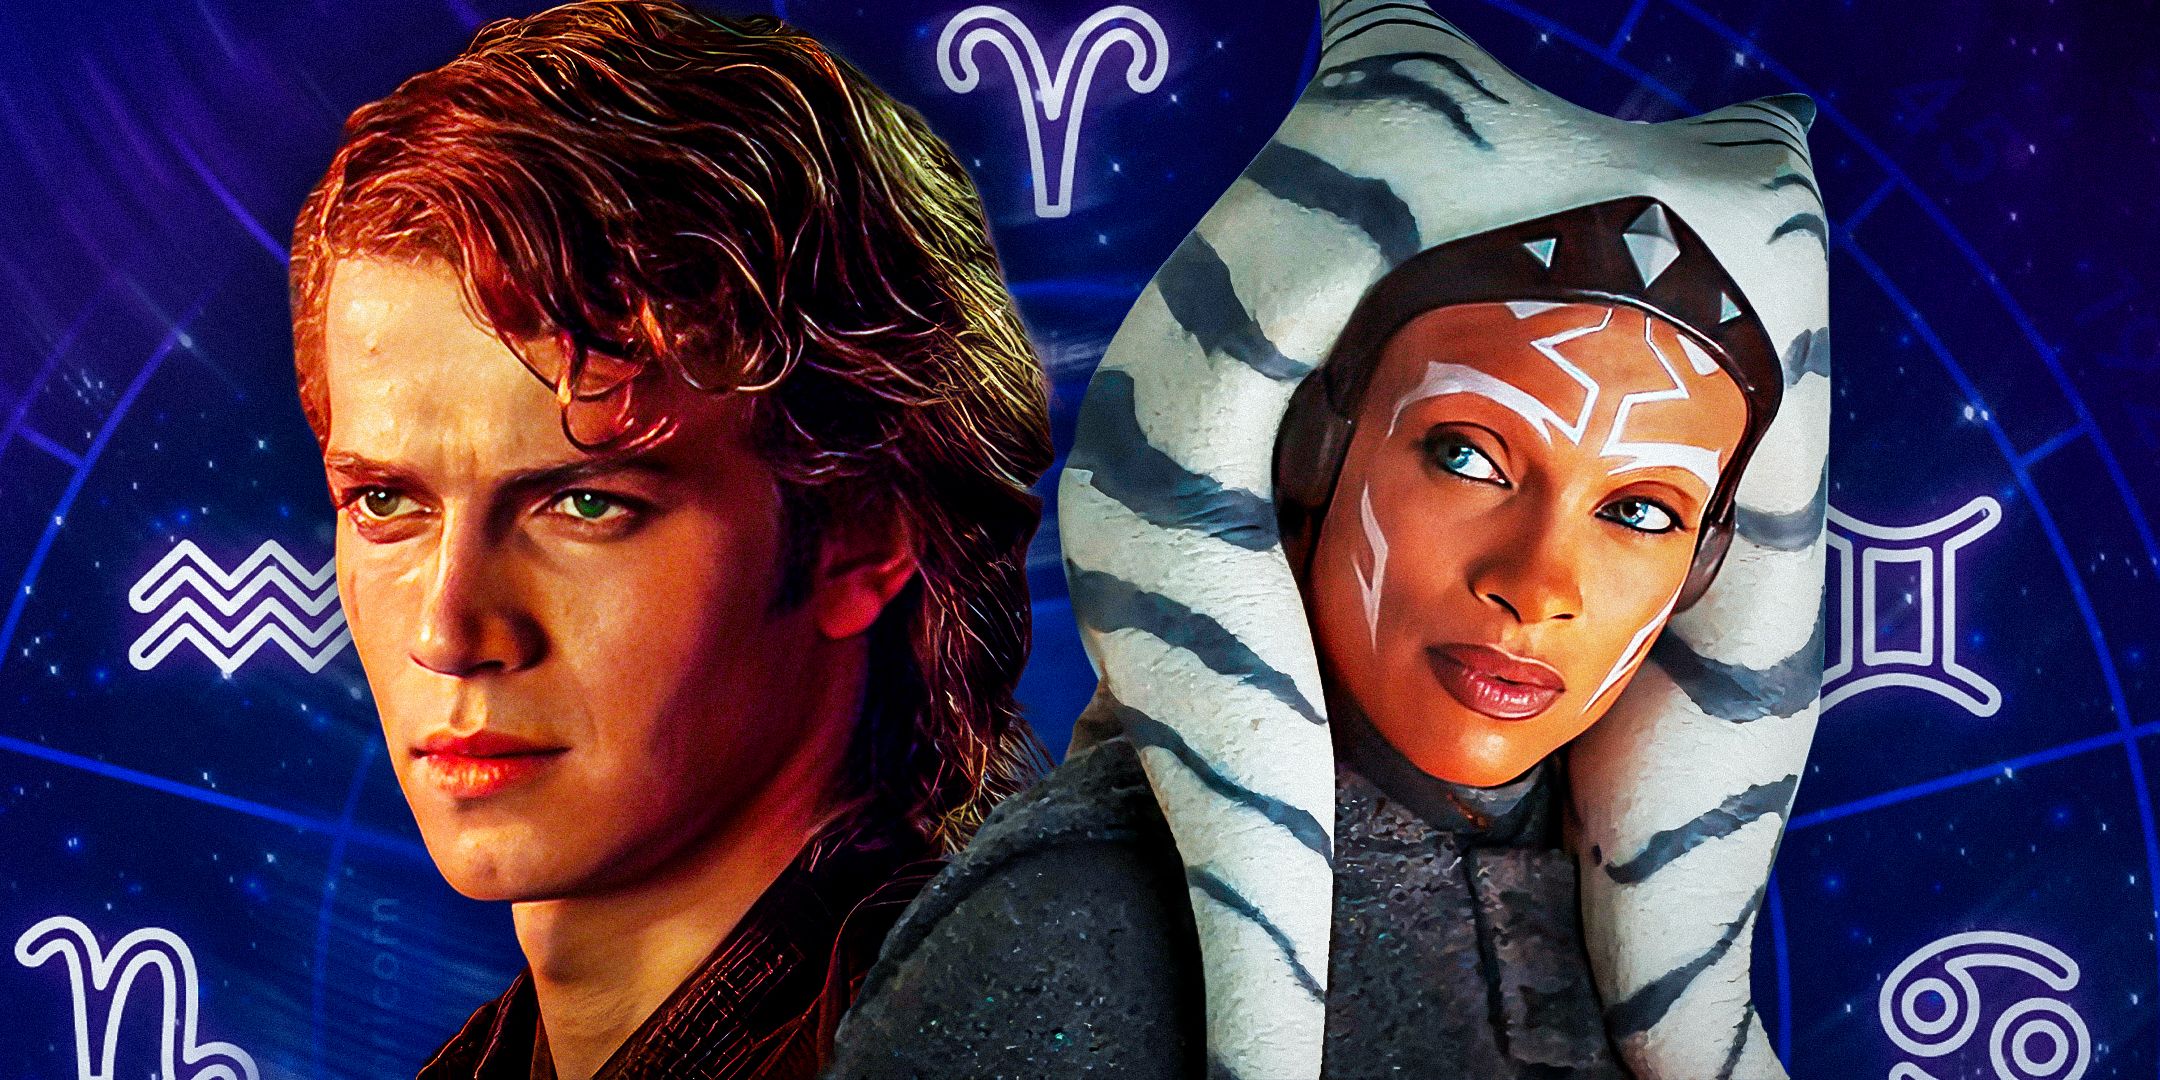 Anakin Skywalker to the left and Ahsoka Tano to the right both in live action in front of an image of the Zodiac signs